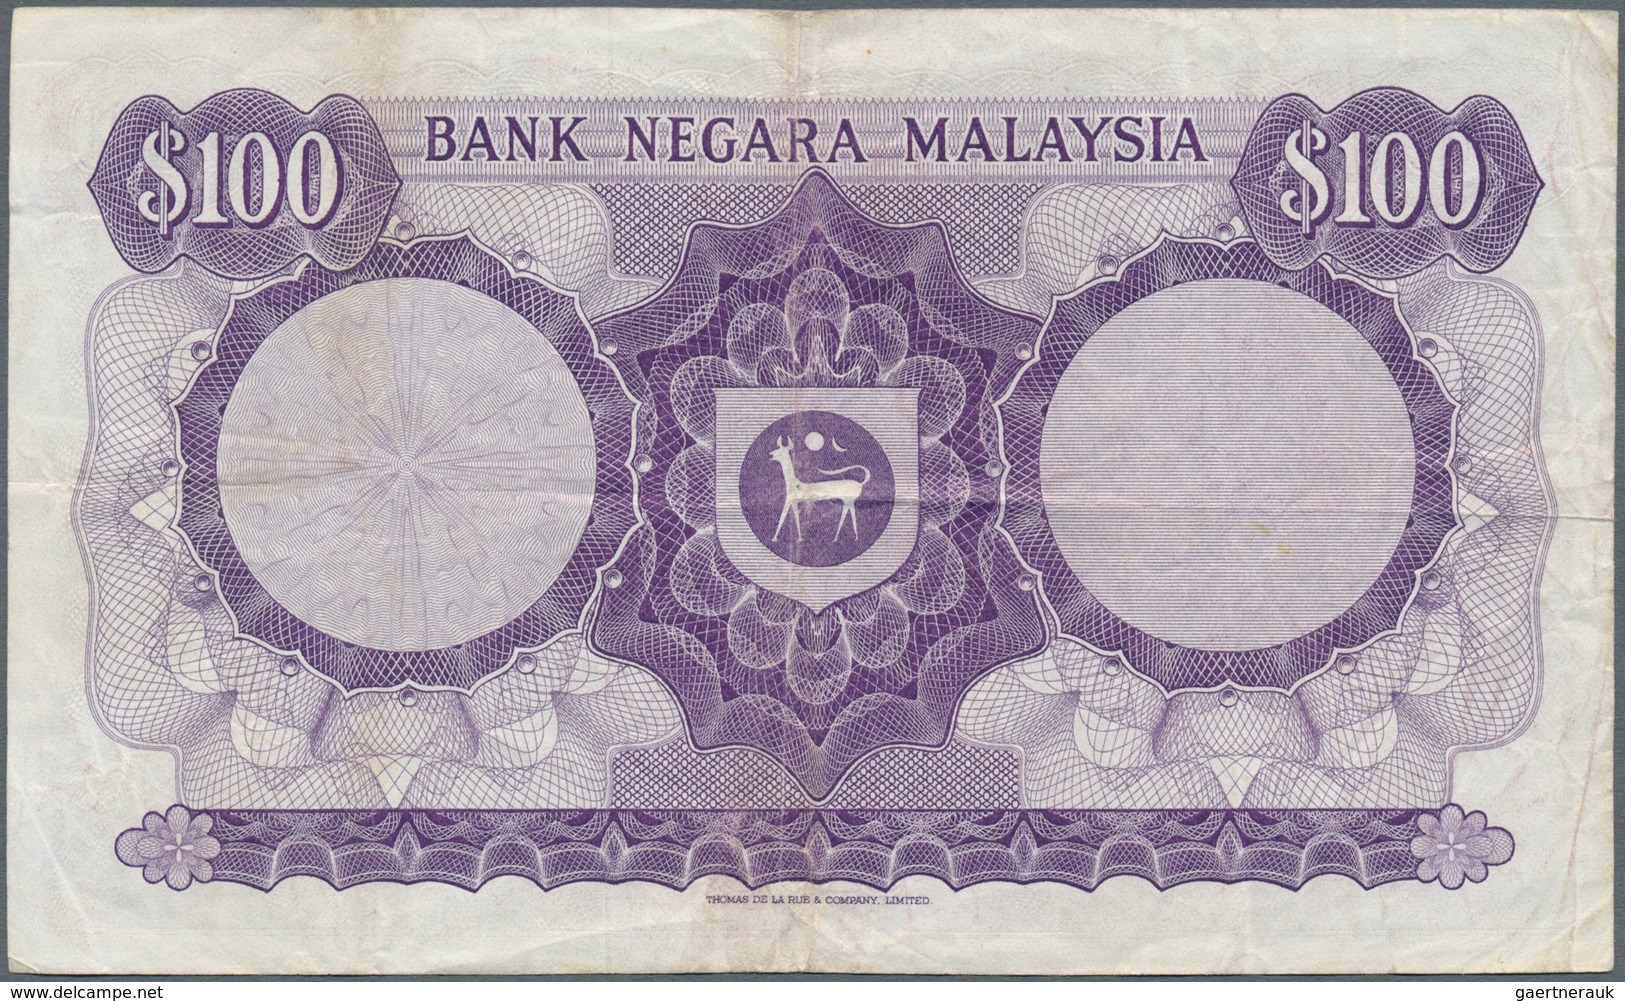 01987 Malaysia: 100 Ringgit ND P. 11 In Used Condition With Folds And Creases, Border Tear (1cm) At Upper - Maleisië